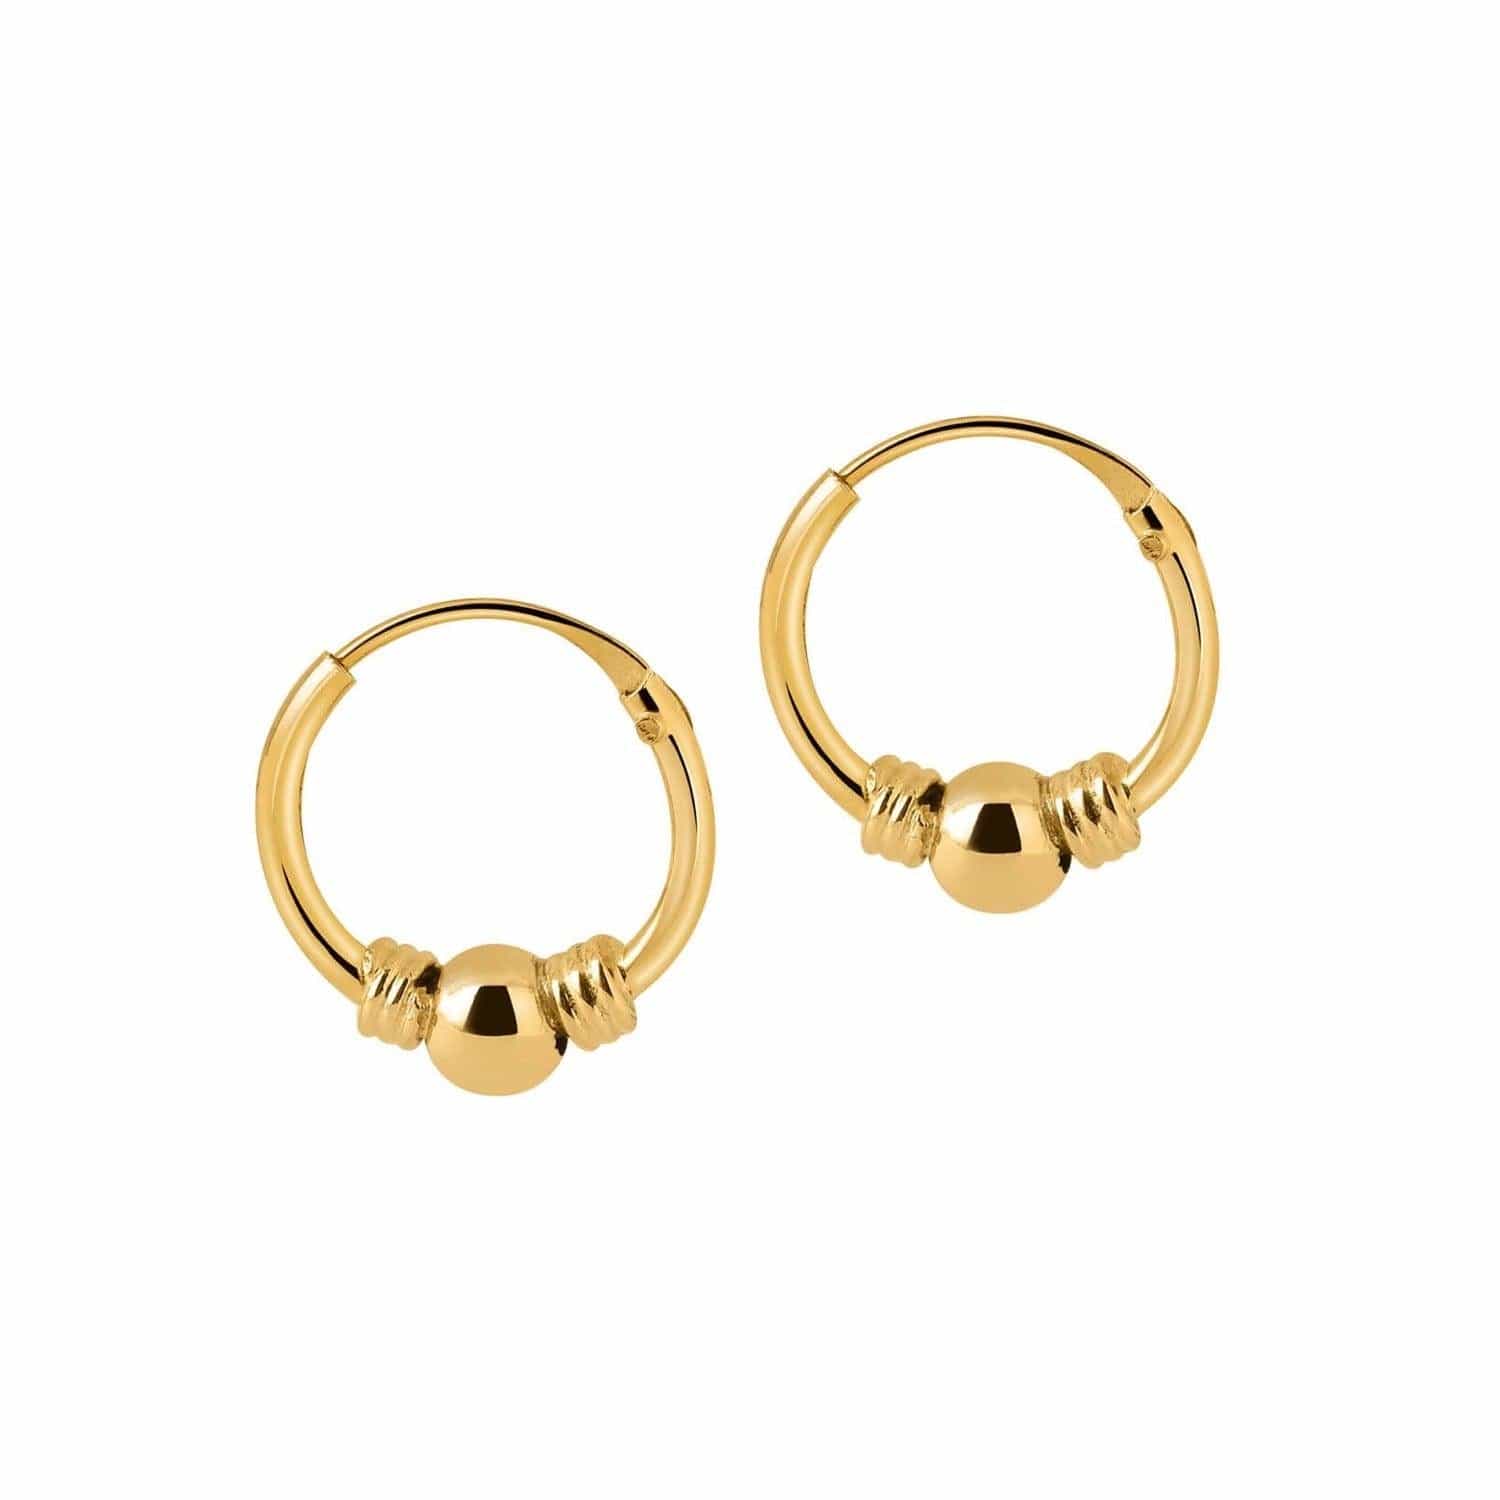 Small Gold Plated Bali Hoop Earrings with ball